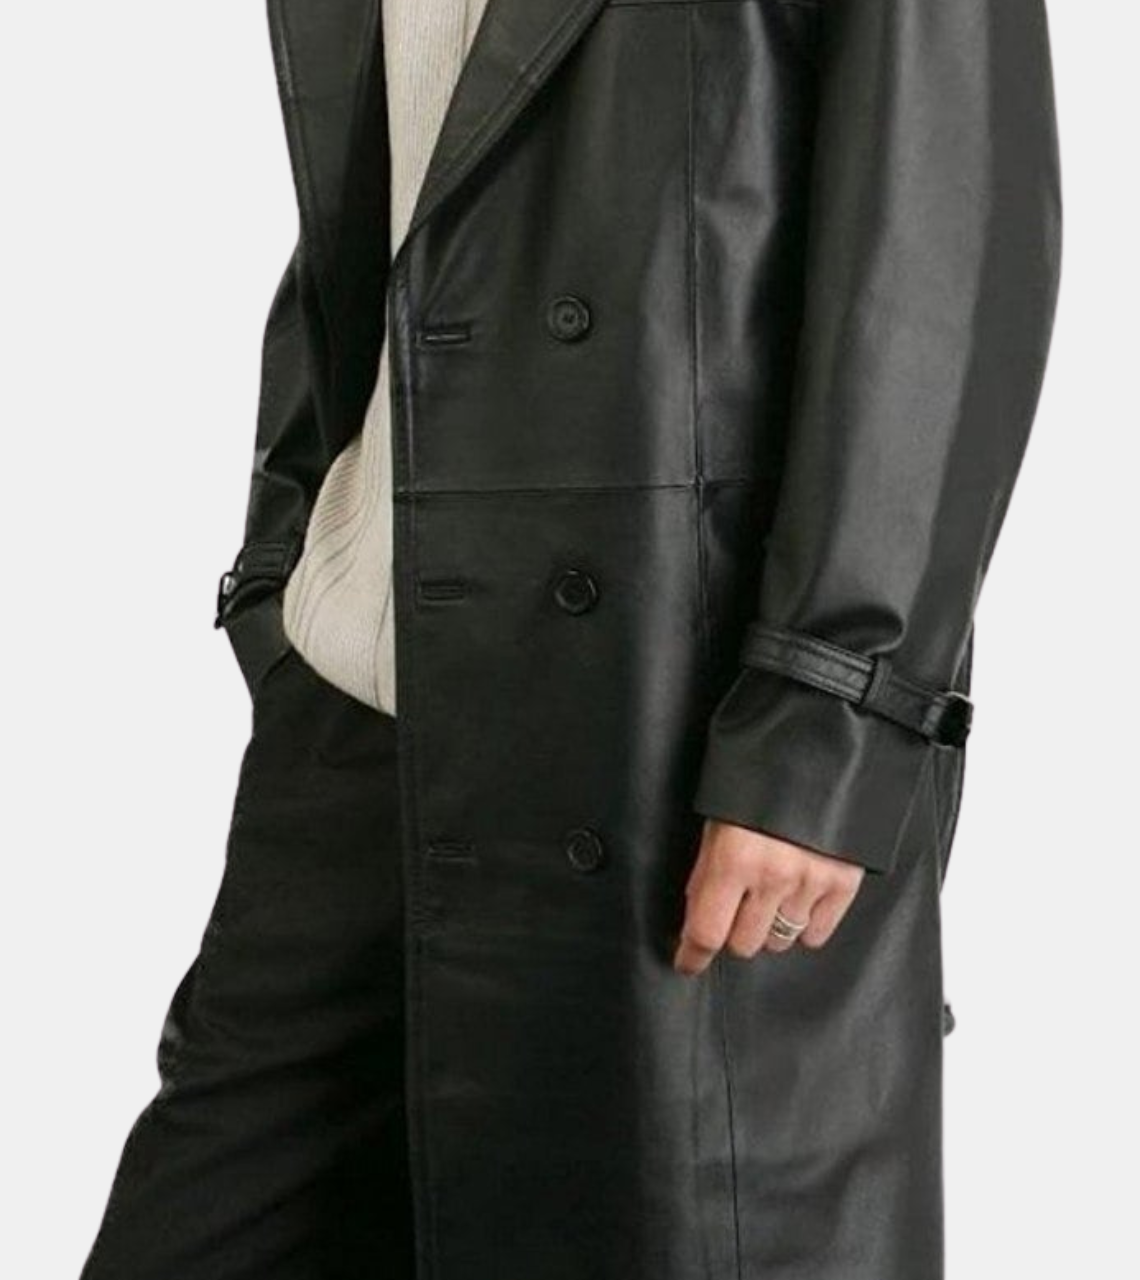  Black Leather Trench Coat